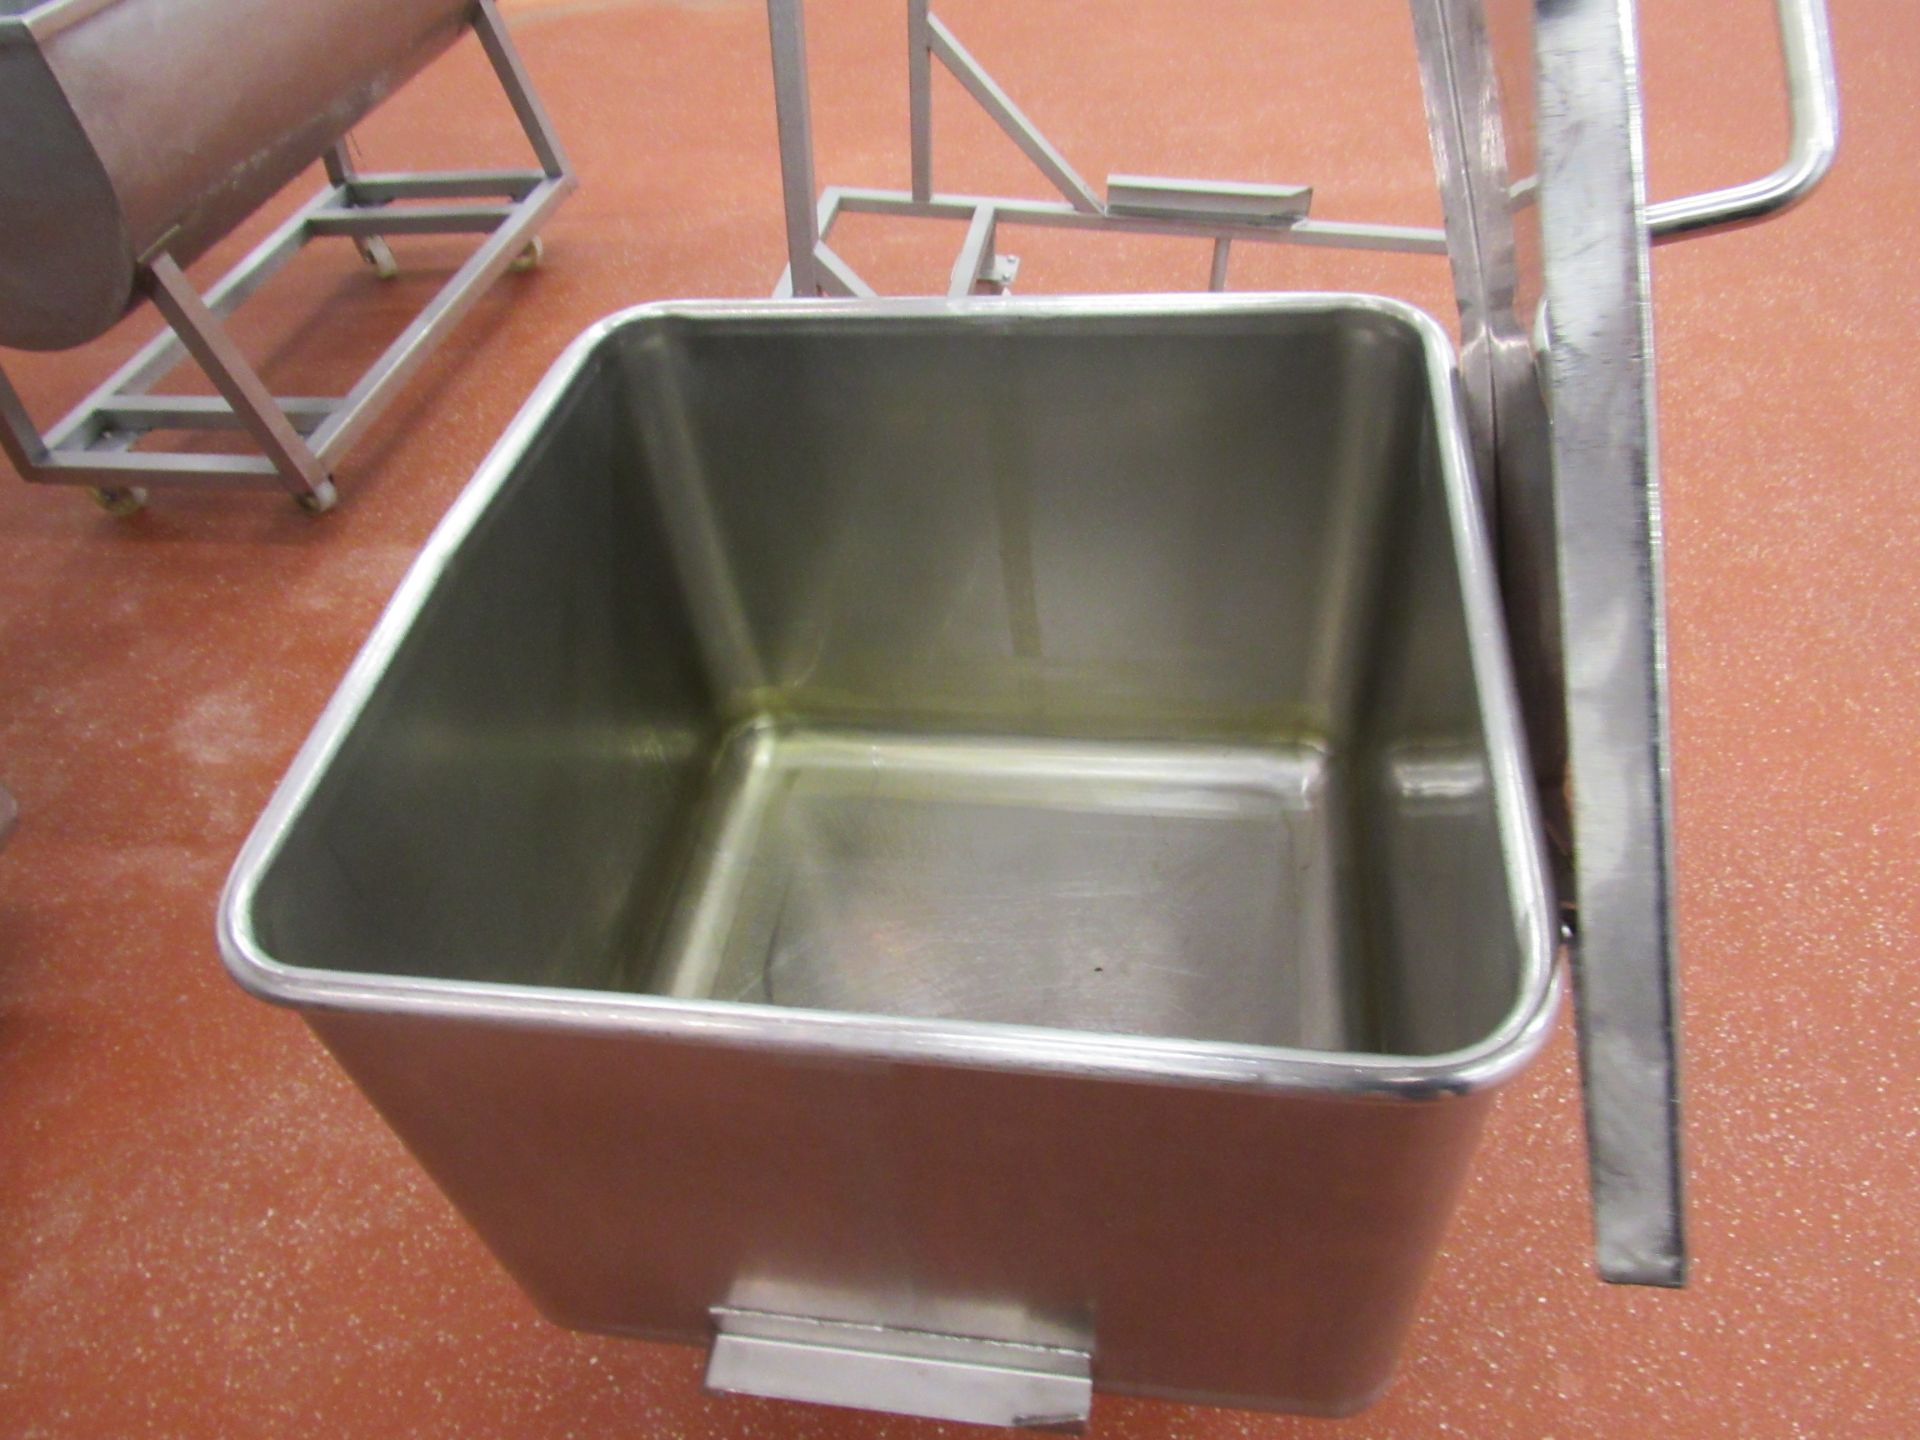 Stainless steel mobile tote bin - Image 2 of 2